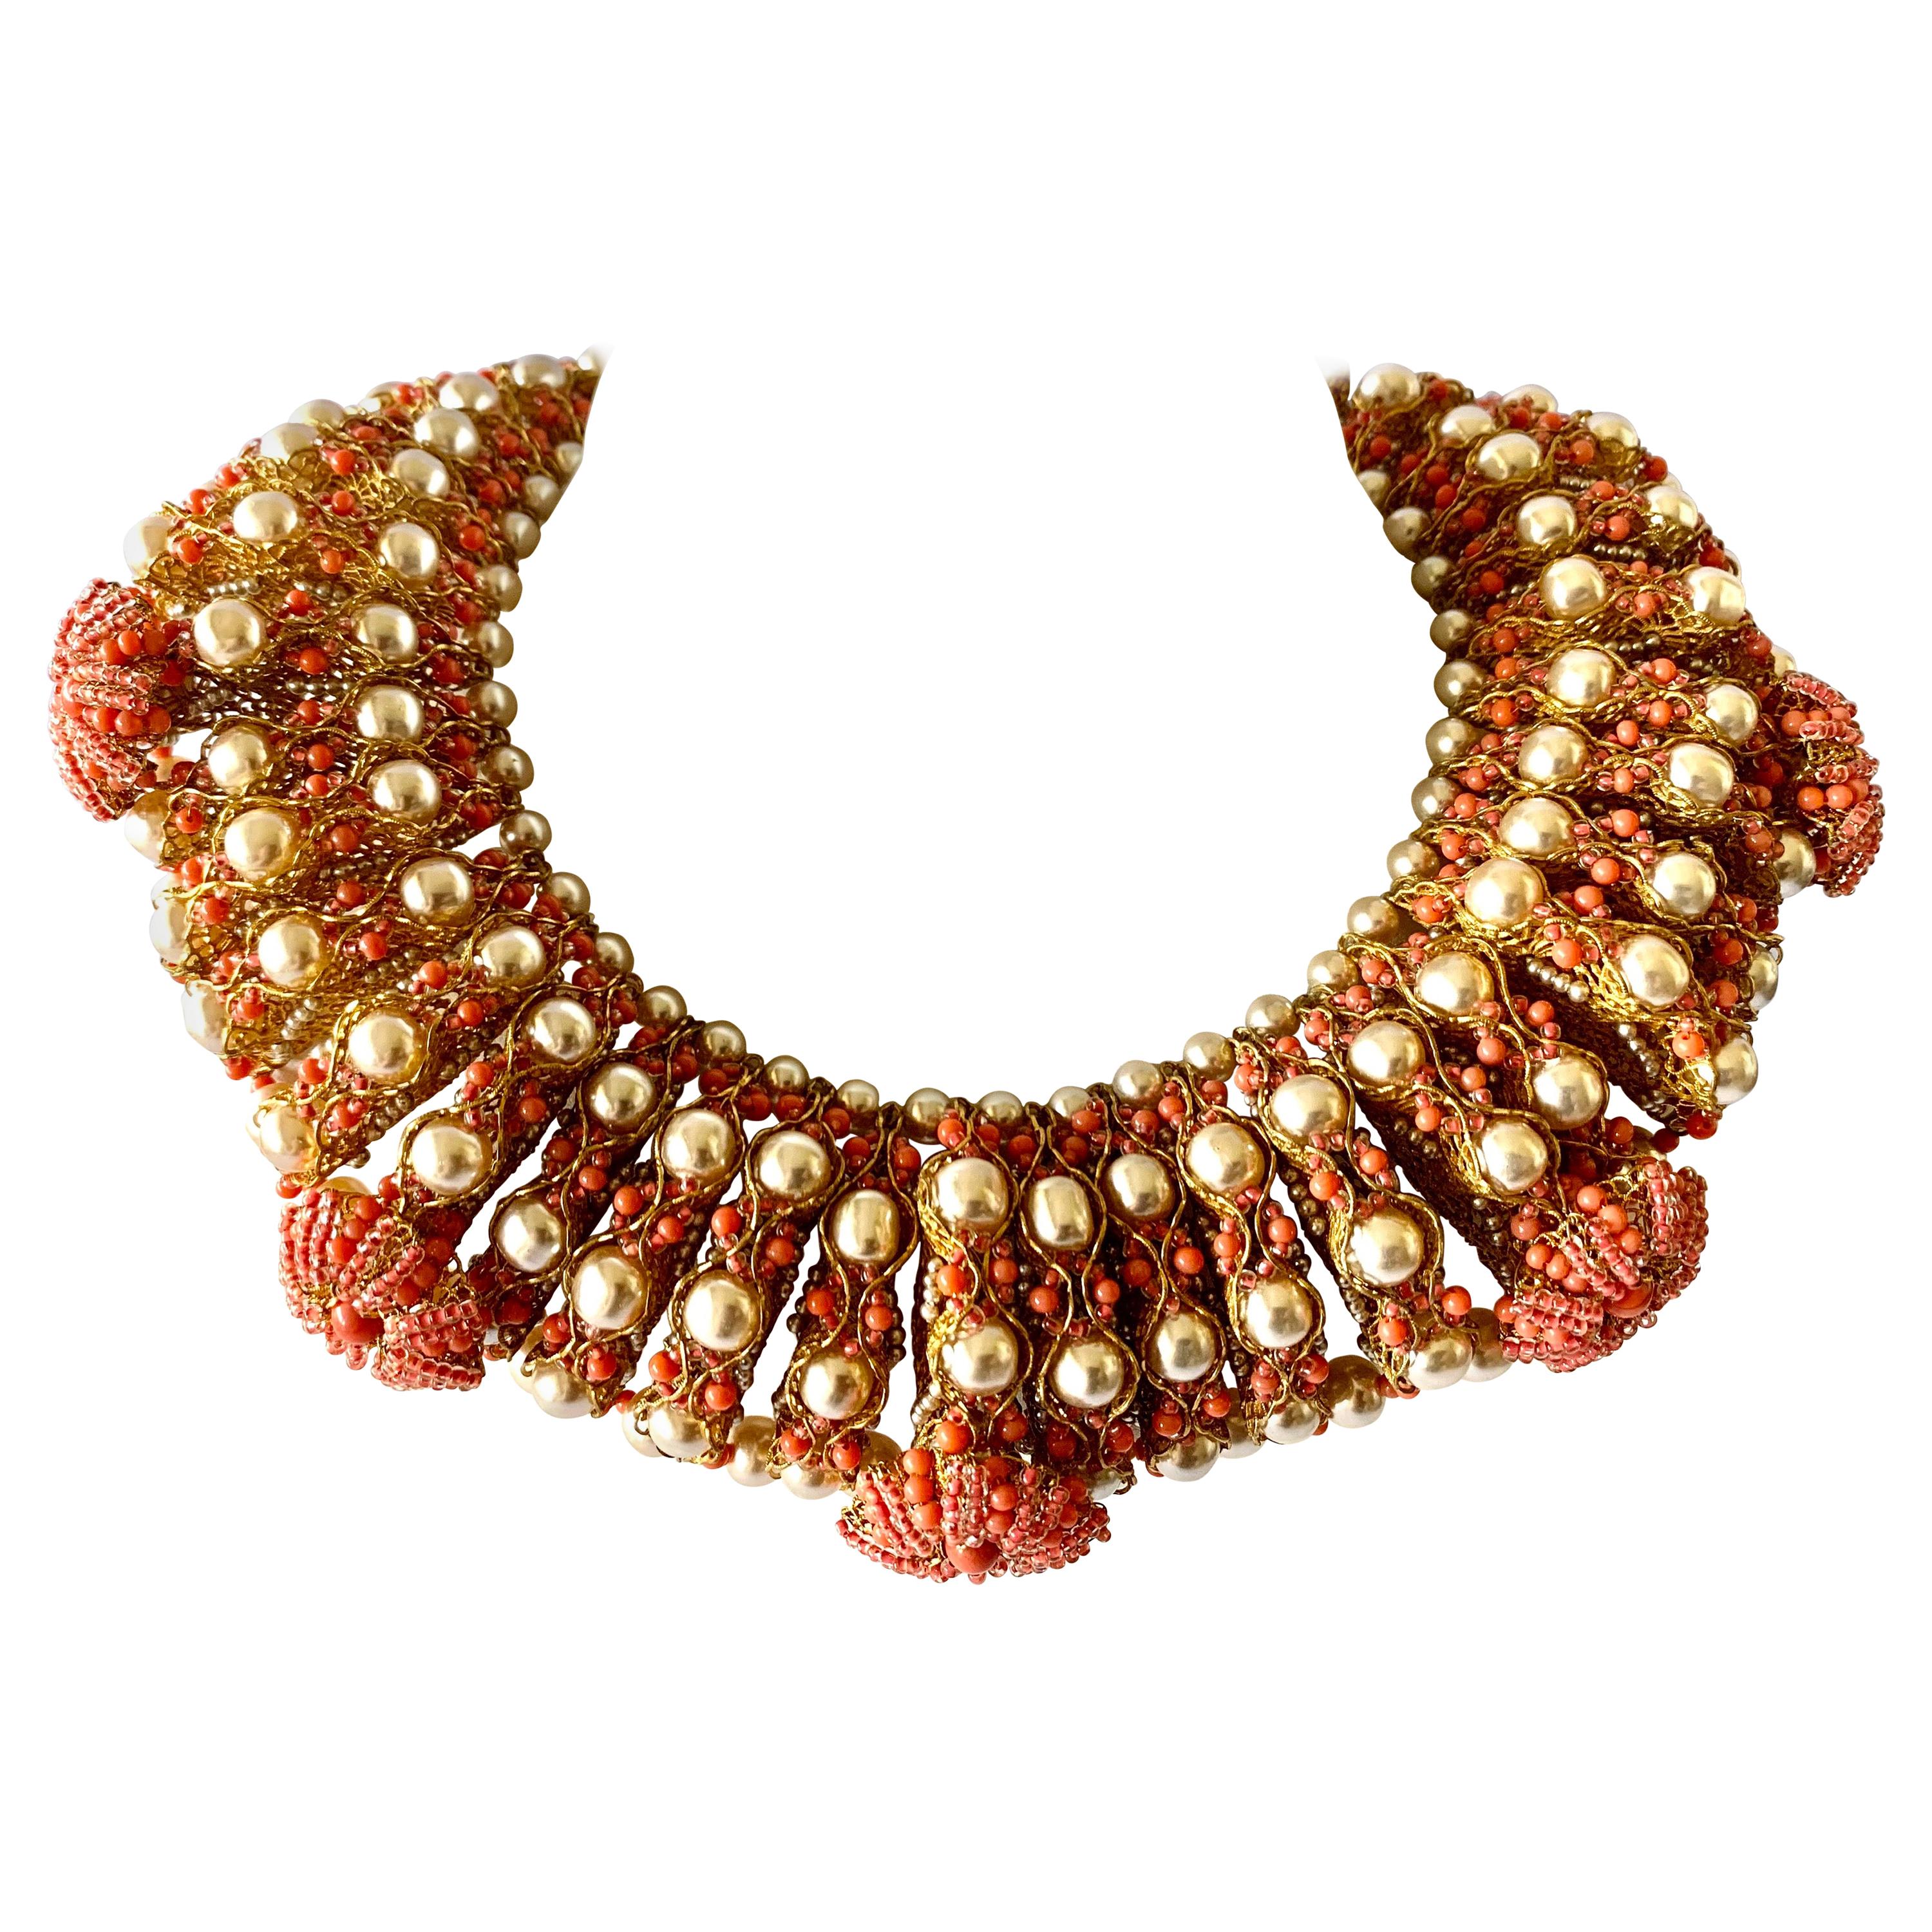 Vintage Gilt Coral and Pearl Beaded Statement Necklace by de Lillo 